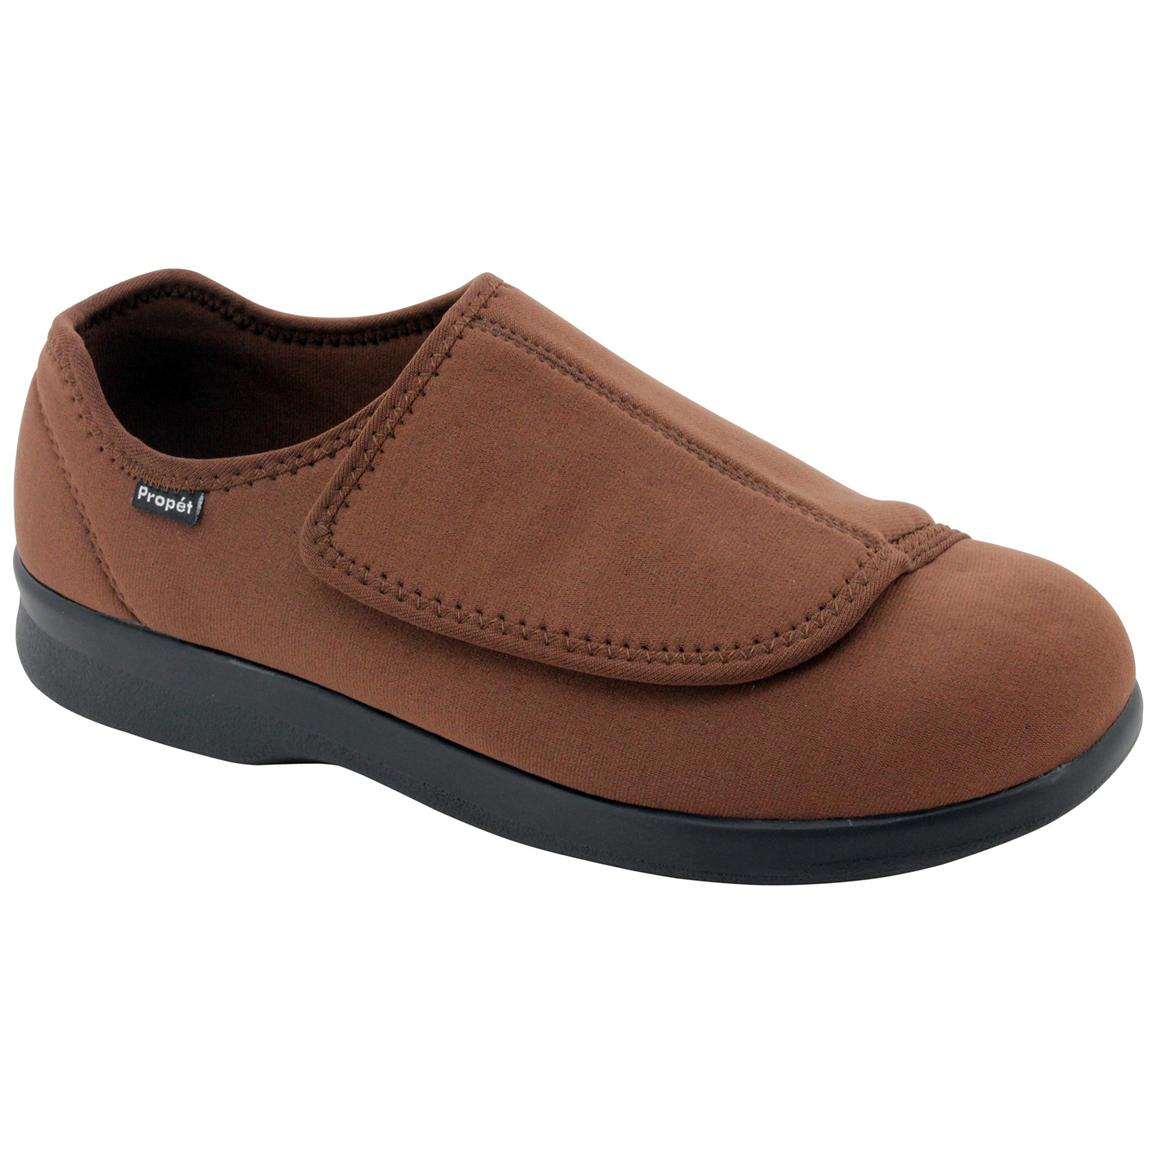 Men's Propet® Crush 'n Foot Shoes - 234535, Slippers at Sportsman's Guide